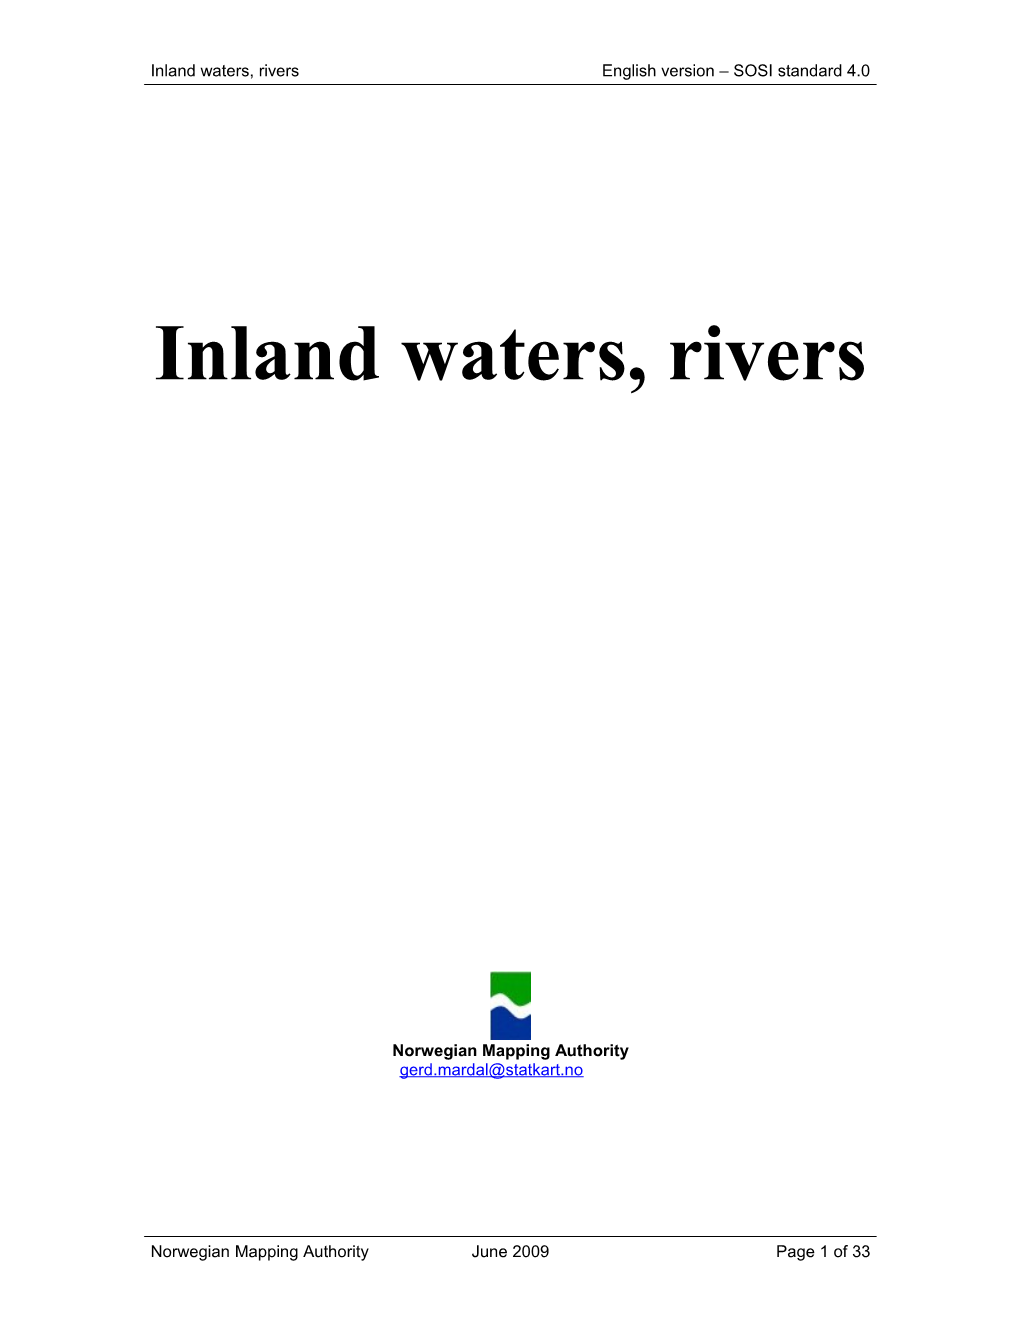 Inland Waters, Rivers